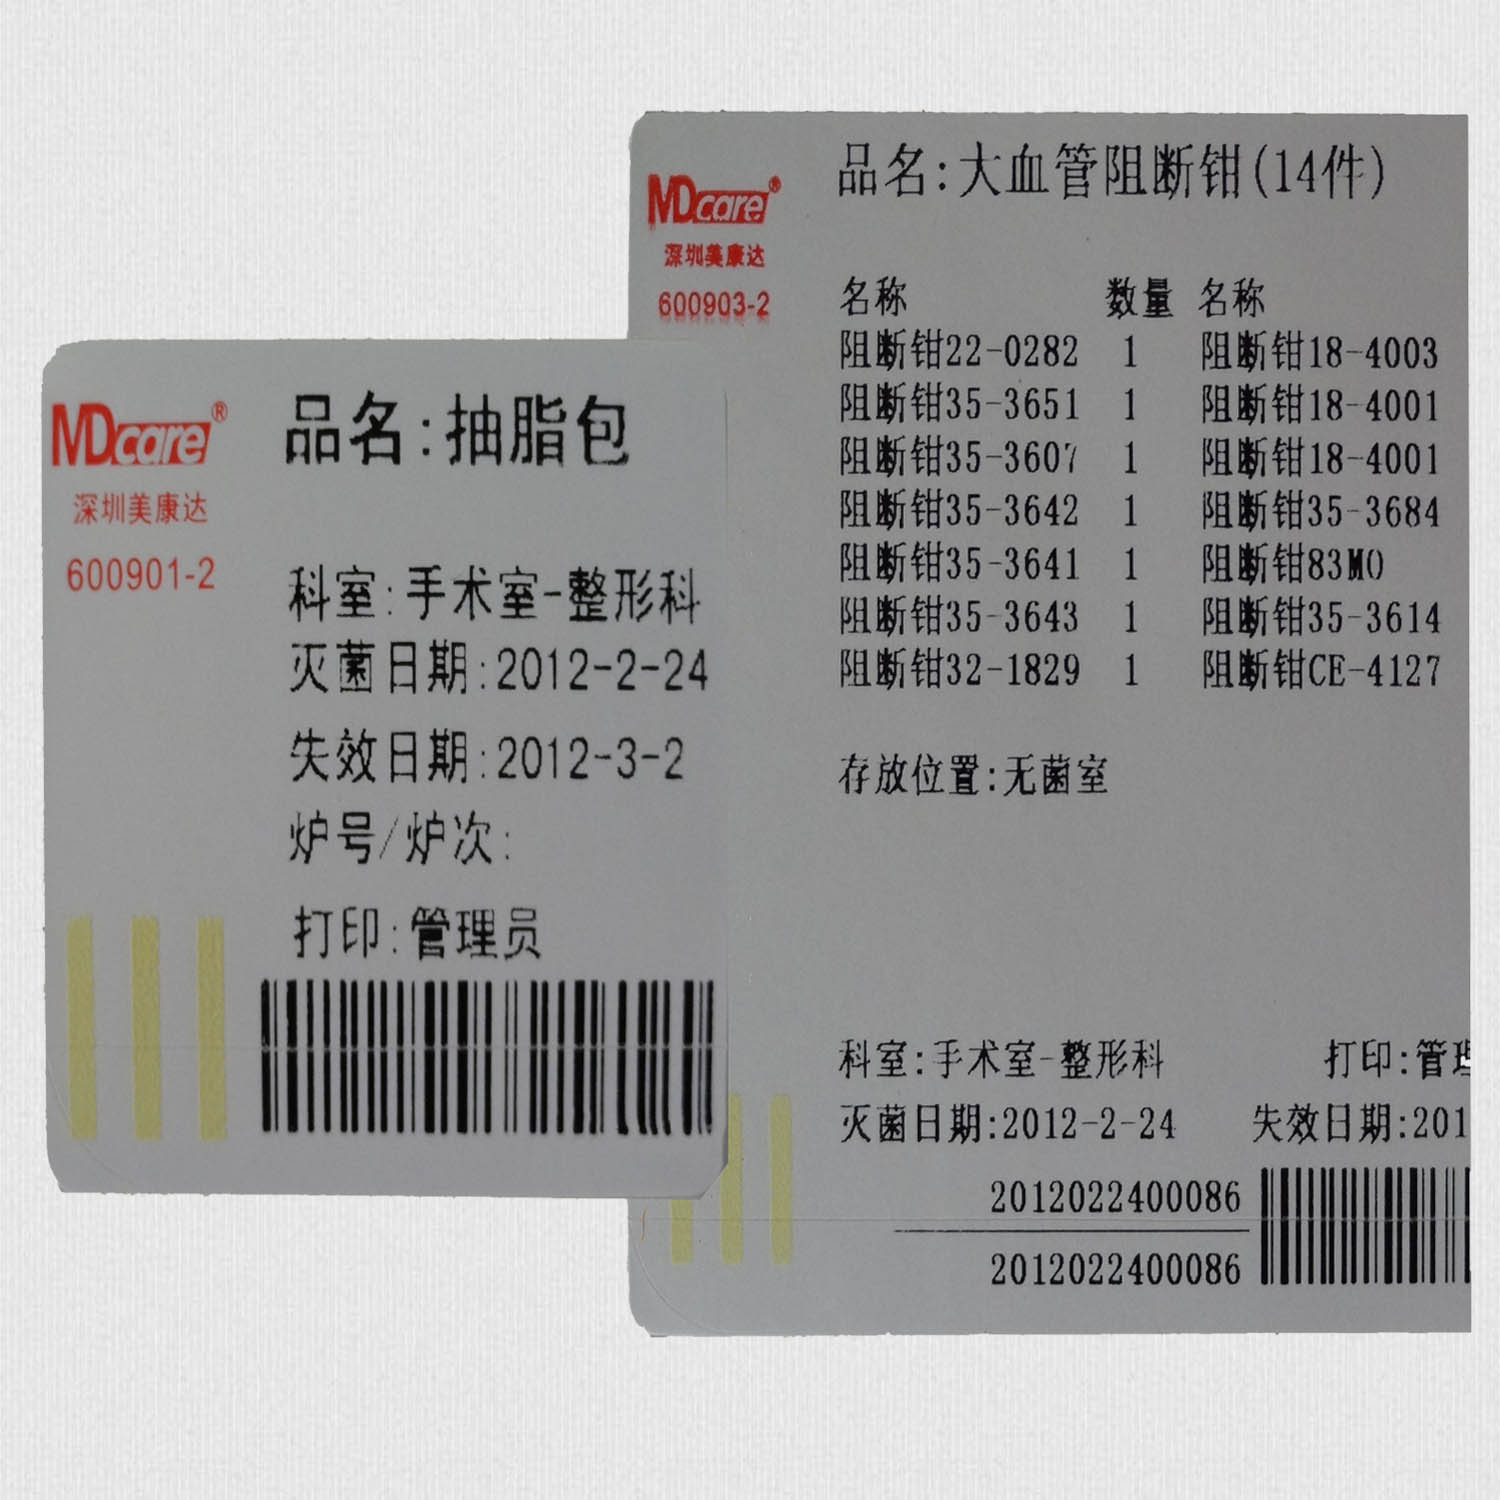 Label with Indicator, non-tracing type and tracing type.